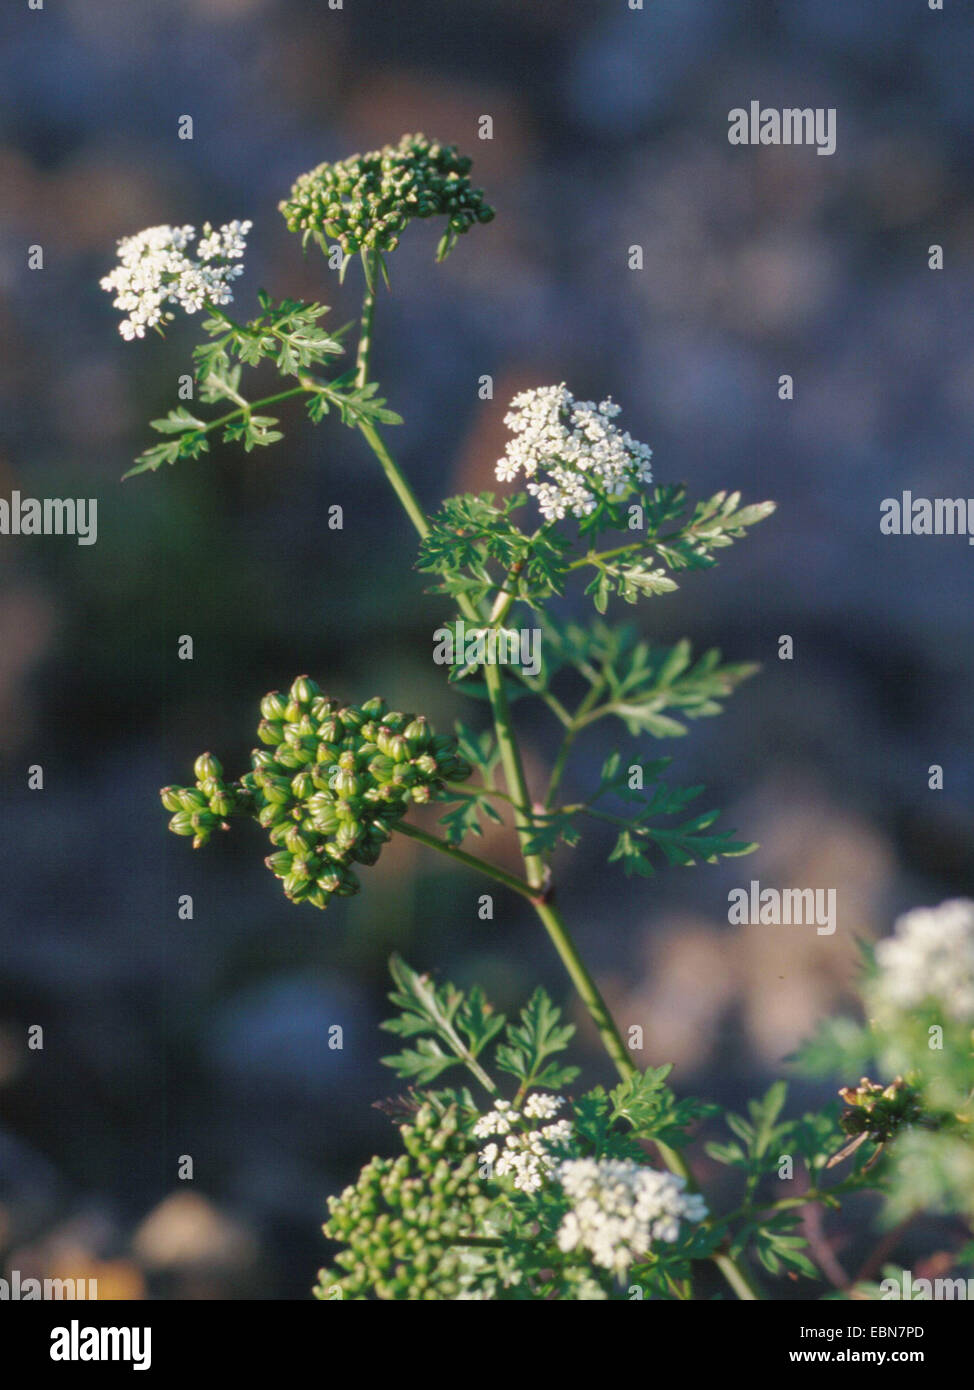 Fool's parsley, Fool's cicely, Poison parsley (Aethusa cynapium, Aethusa cynapium subsp. cynapium), with flowers and fruits, Germany Stock Photo